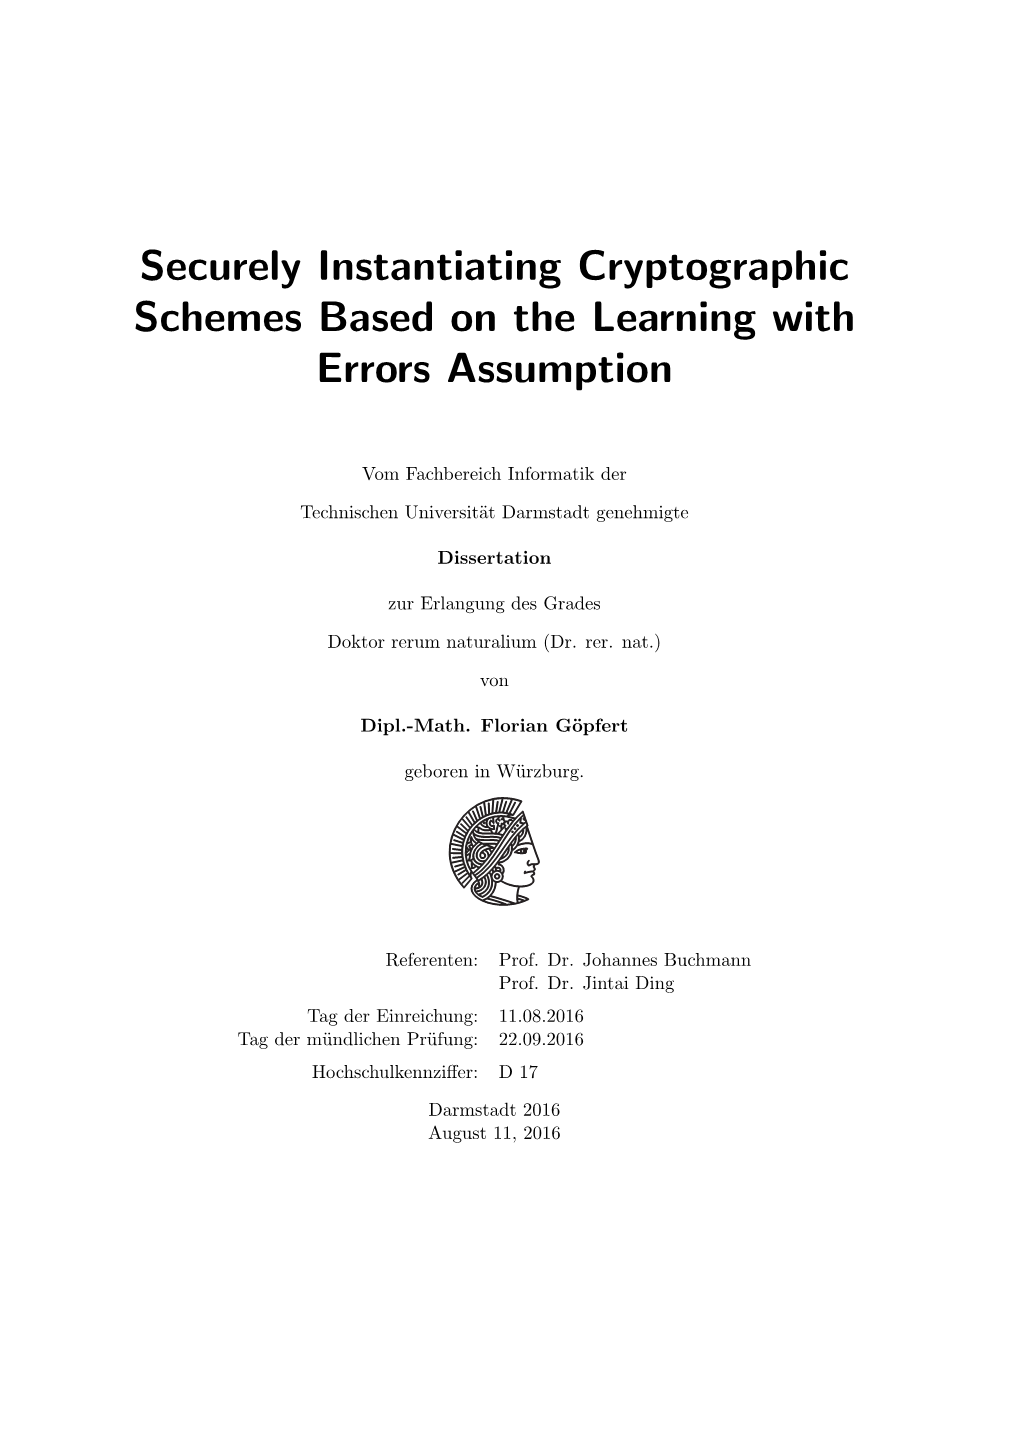 Securely Instantiating Cryptographic Schemes Based on the Learning with Errors Assumption